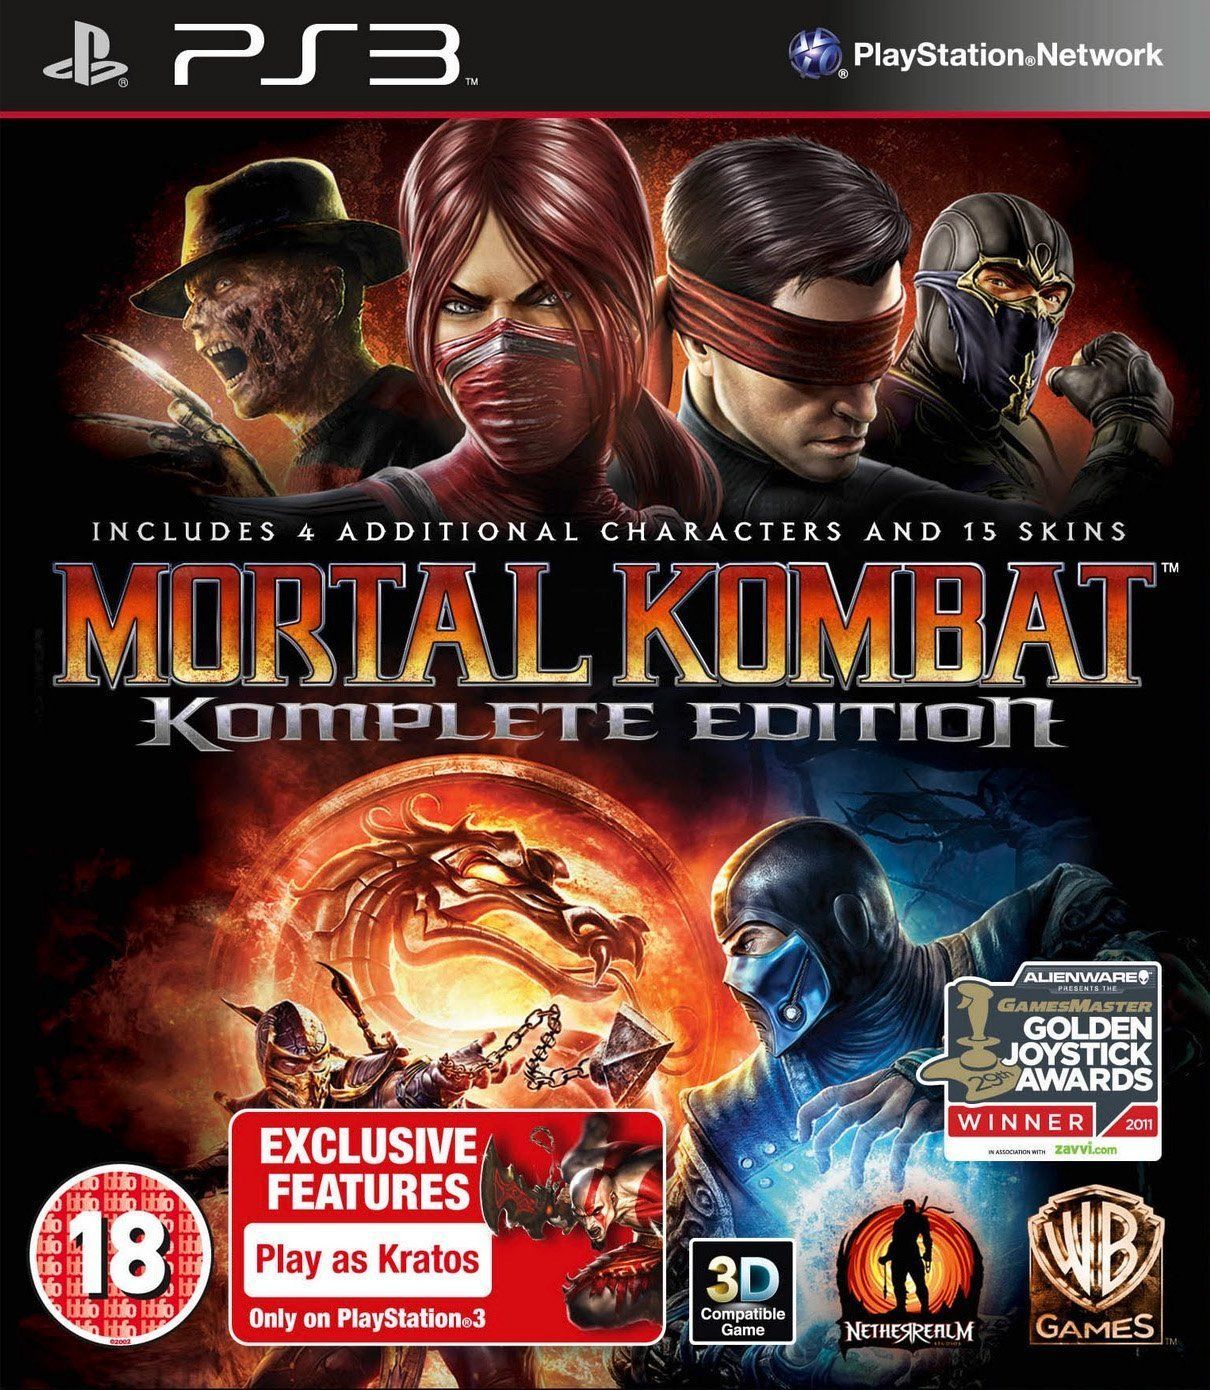 wrijving Zonsverduistering stromen Mortal Kombat: Komplete Edition (2011)(PS3)(Pwned) | Buy from Pwned Games  with confidence. | PS3 Games [Pwned]